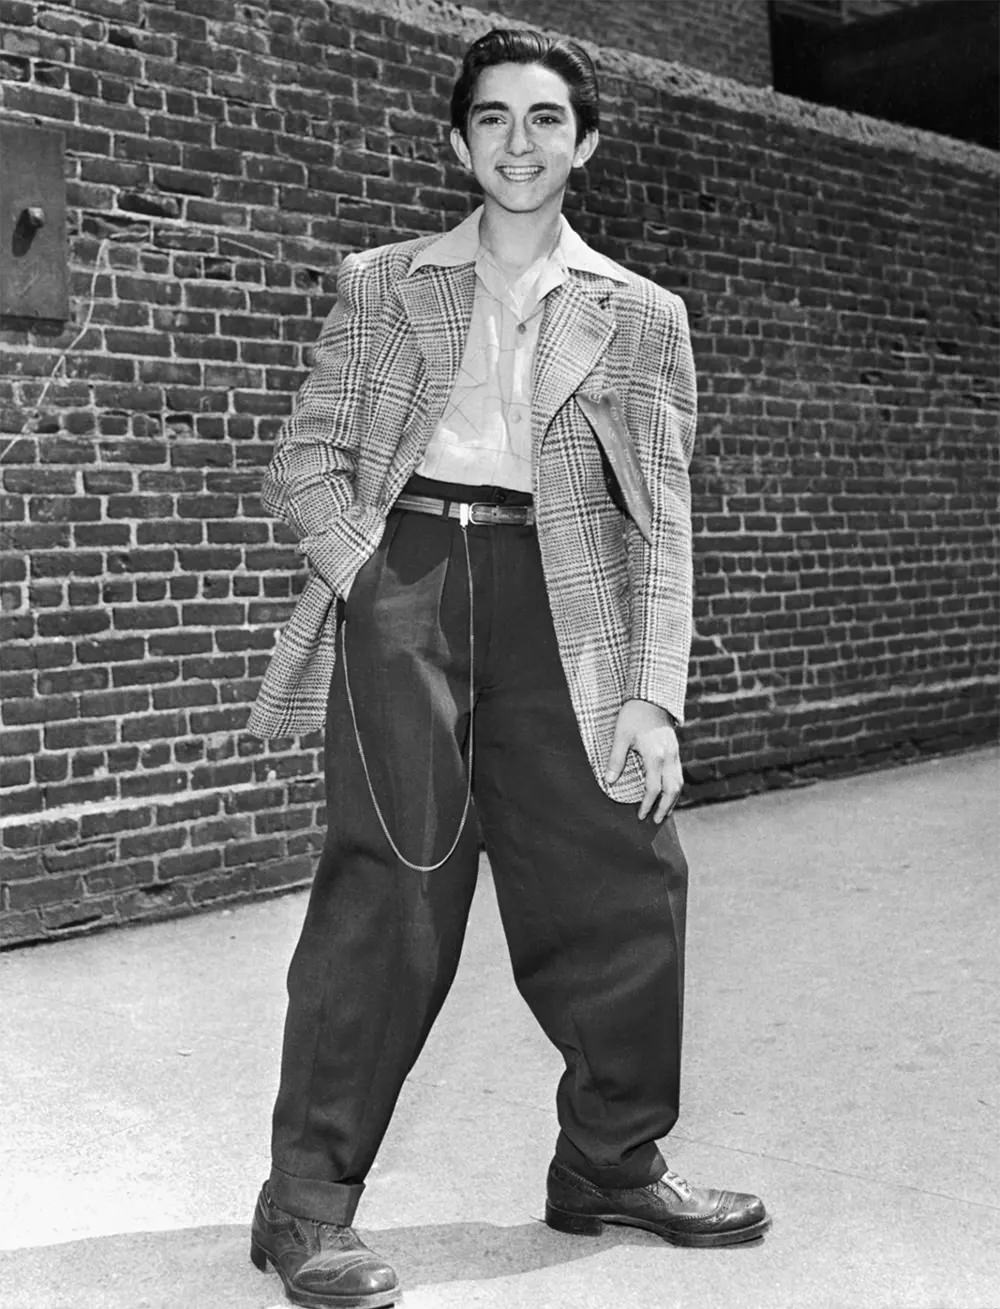 Teenager in a “zoot suit”. 1943